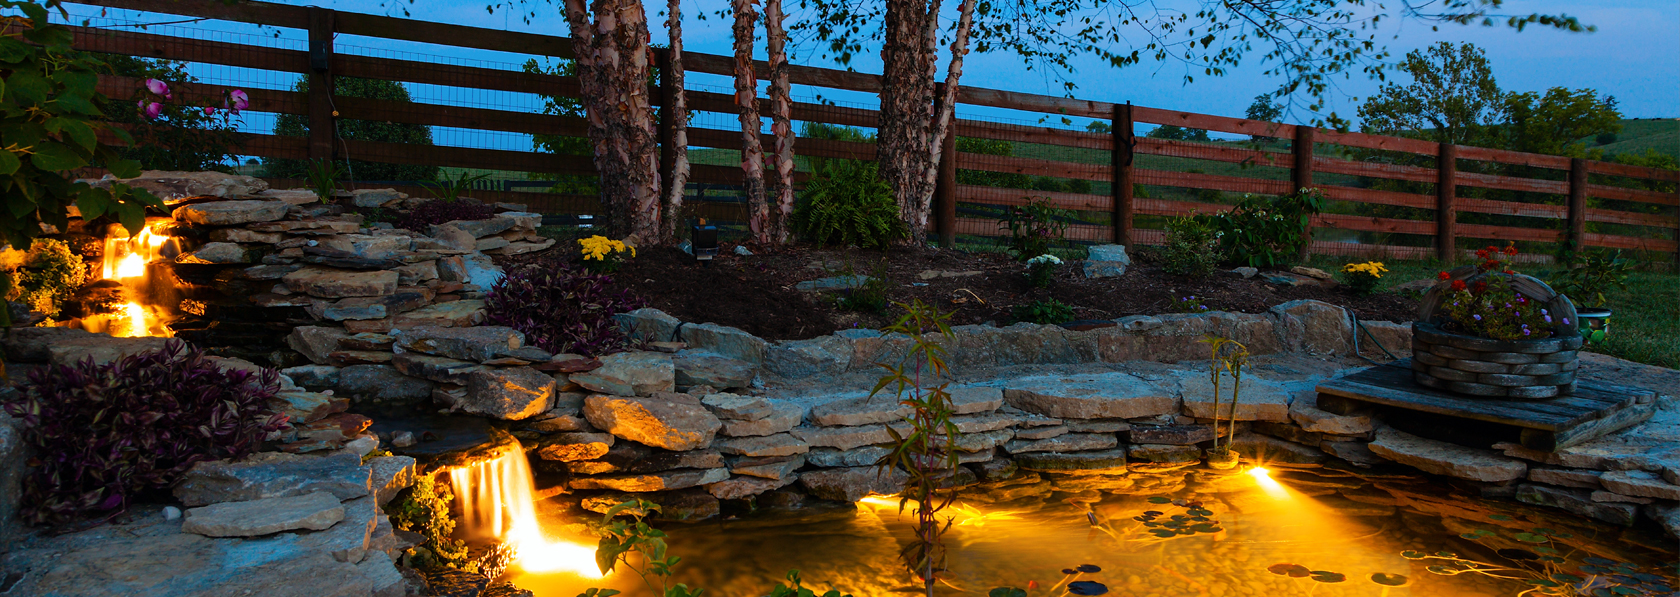 We Make Your Outdoor Space Come to Life!